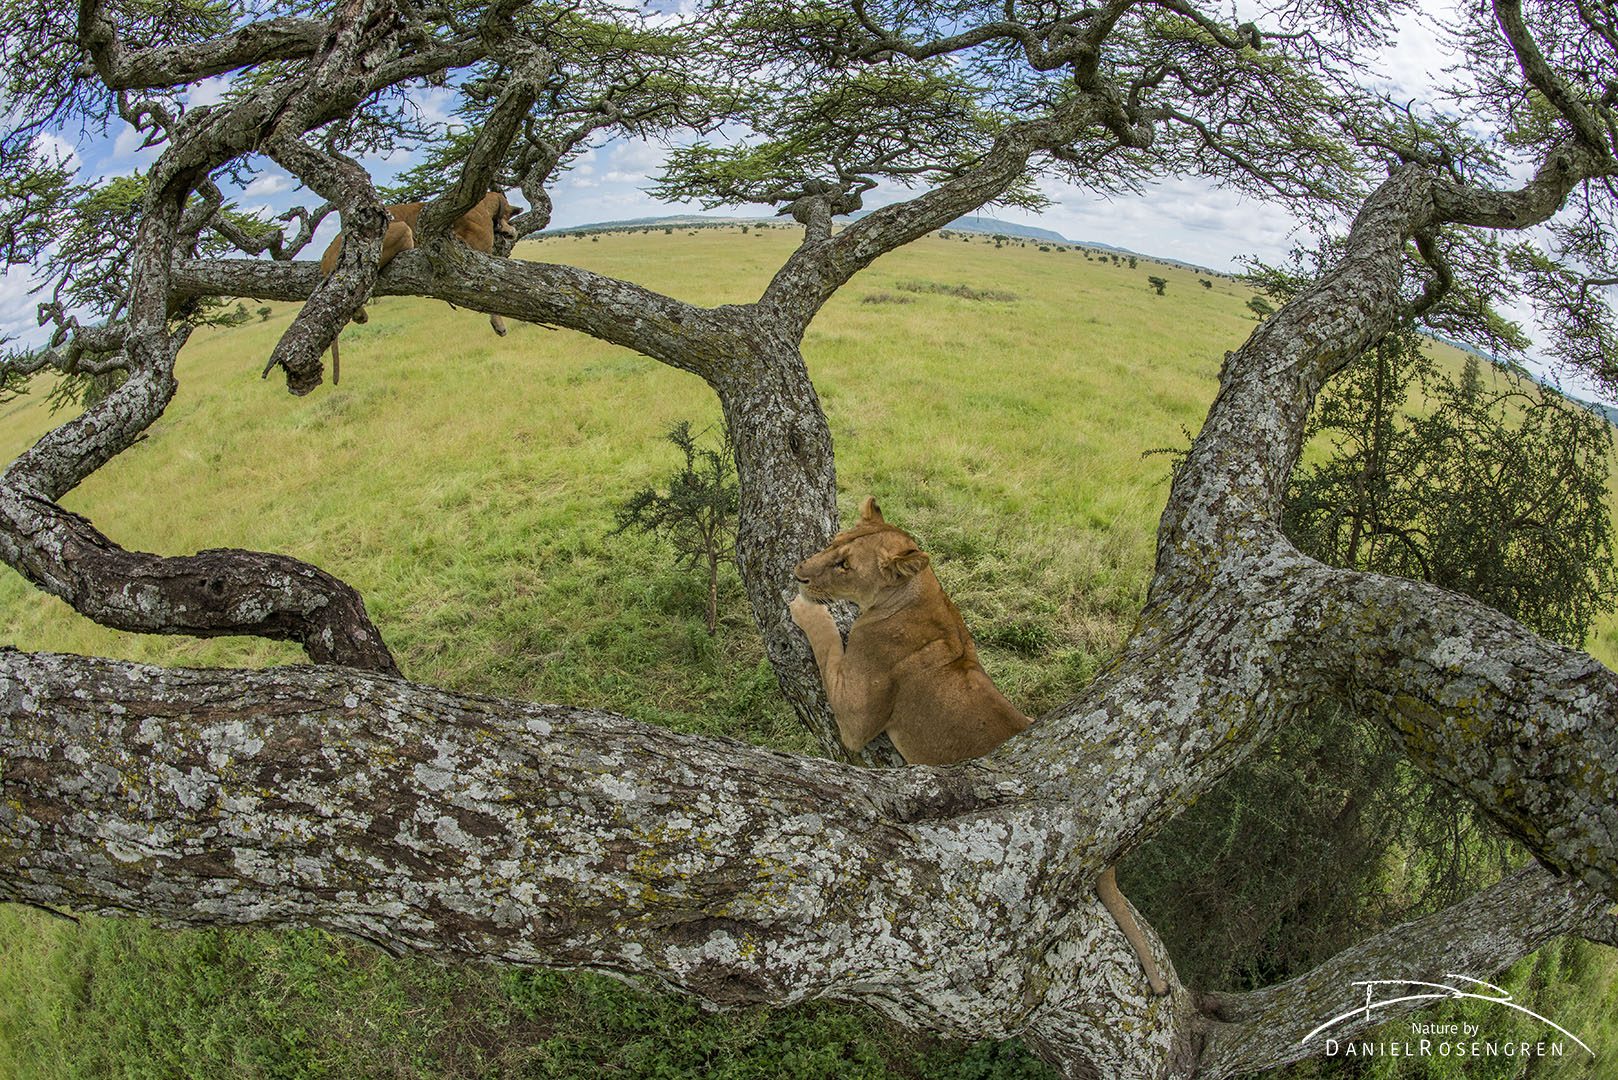 Lions in a tree from a lion's in a tree perspective. © Daniel Rosengren